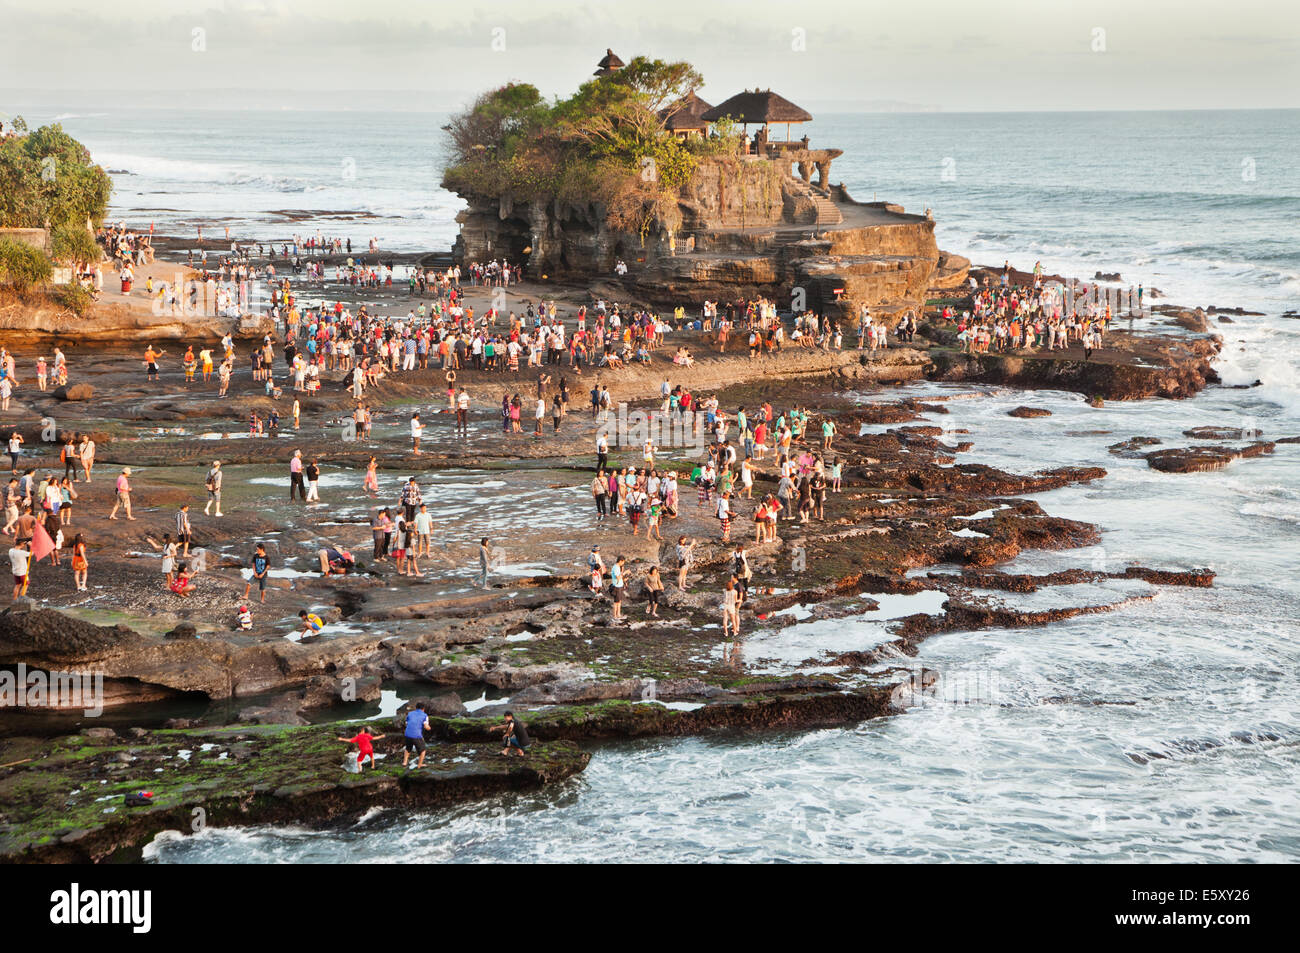 Tanah Lot temple in Bali with mass of tourists gathered to view the sunset  at the famous rock temple on the Bali coastline. A natural coastal feature  Stock Photo - Alamy